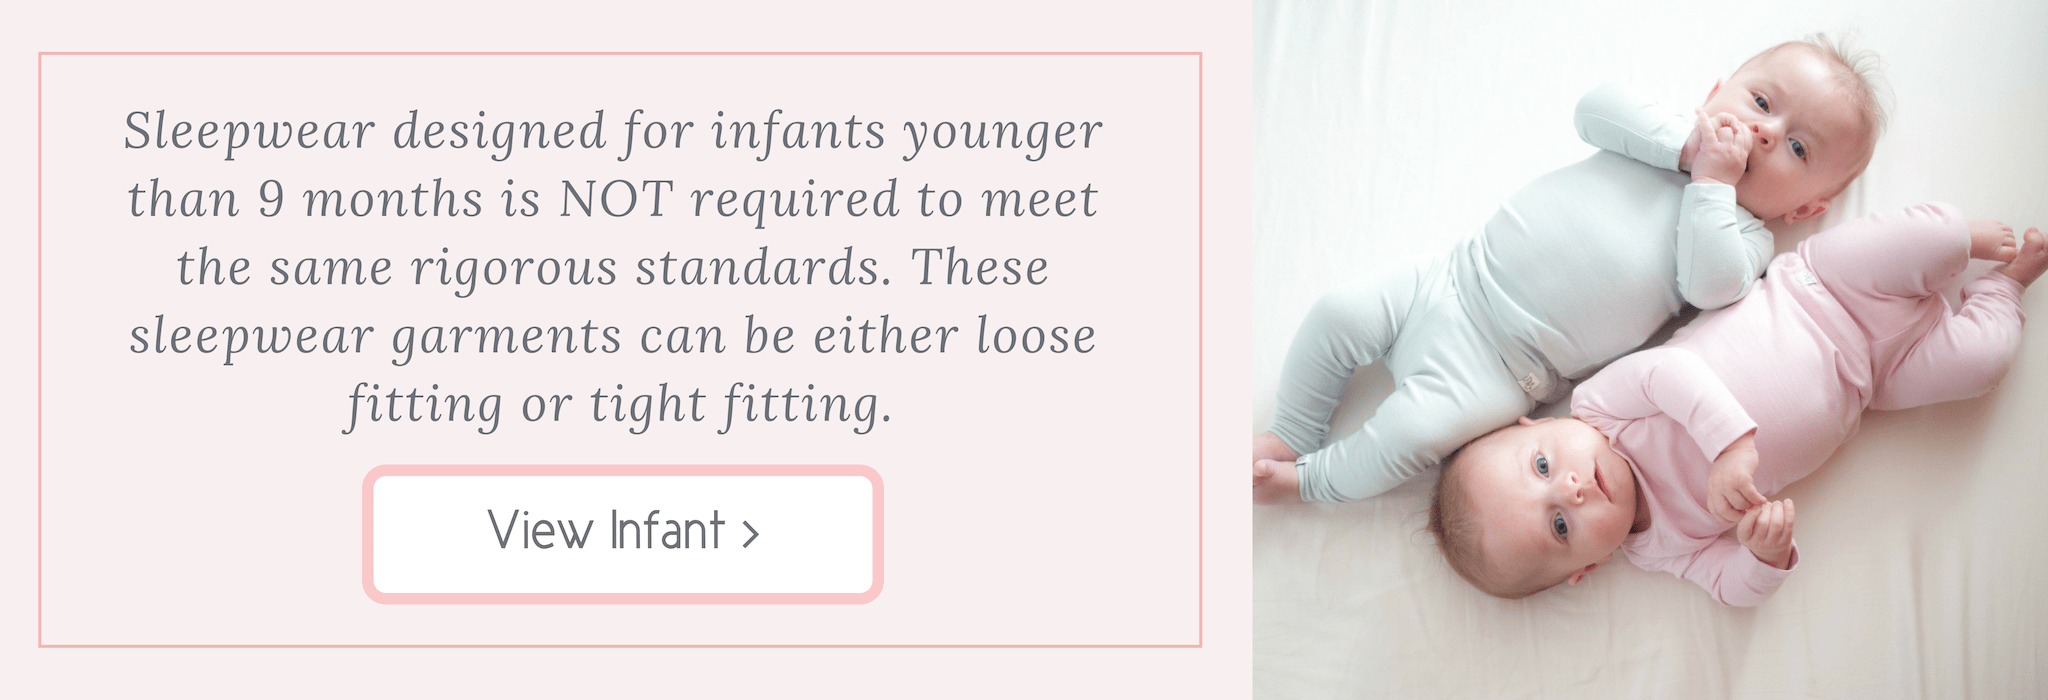 snug-fit-pajamas-or-loose-fit-pajamas-for-infants